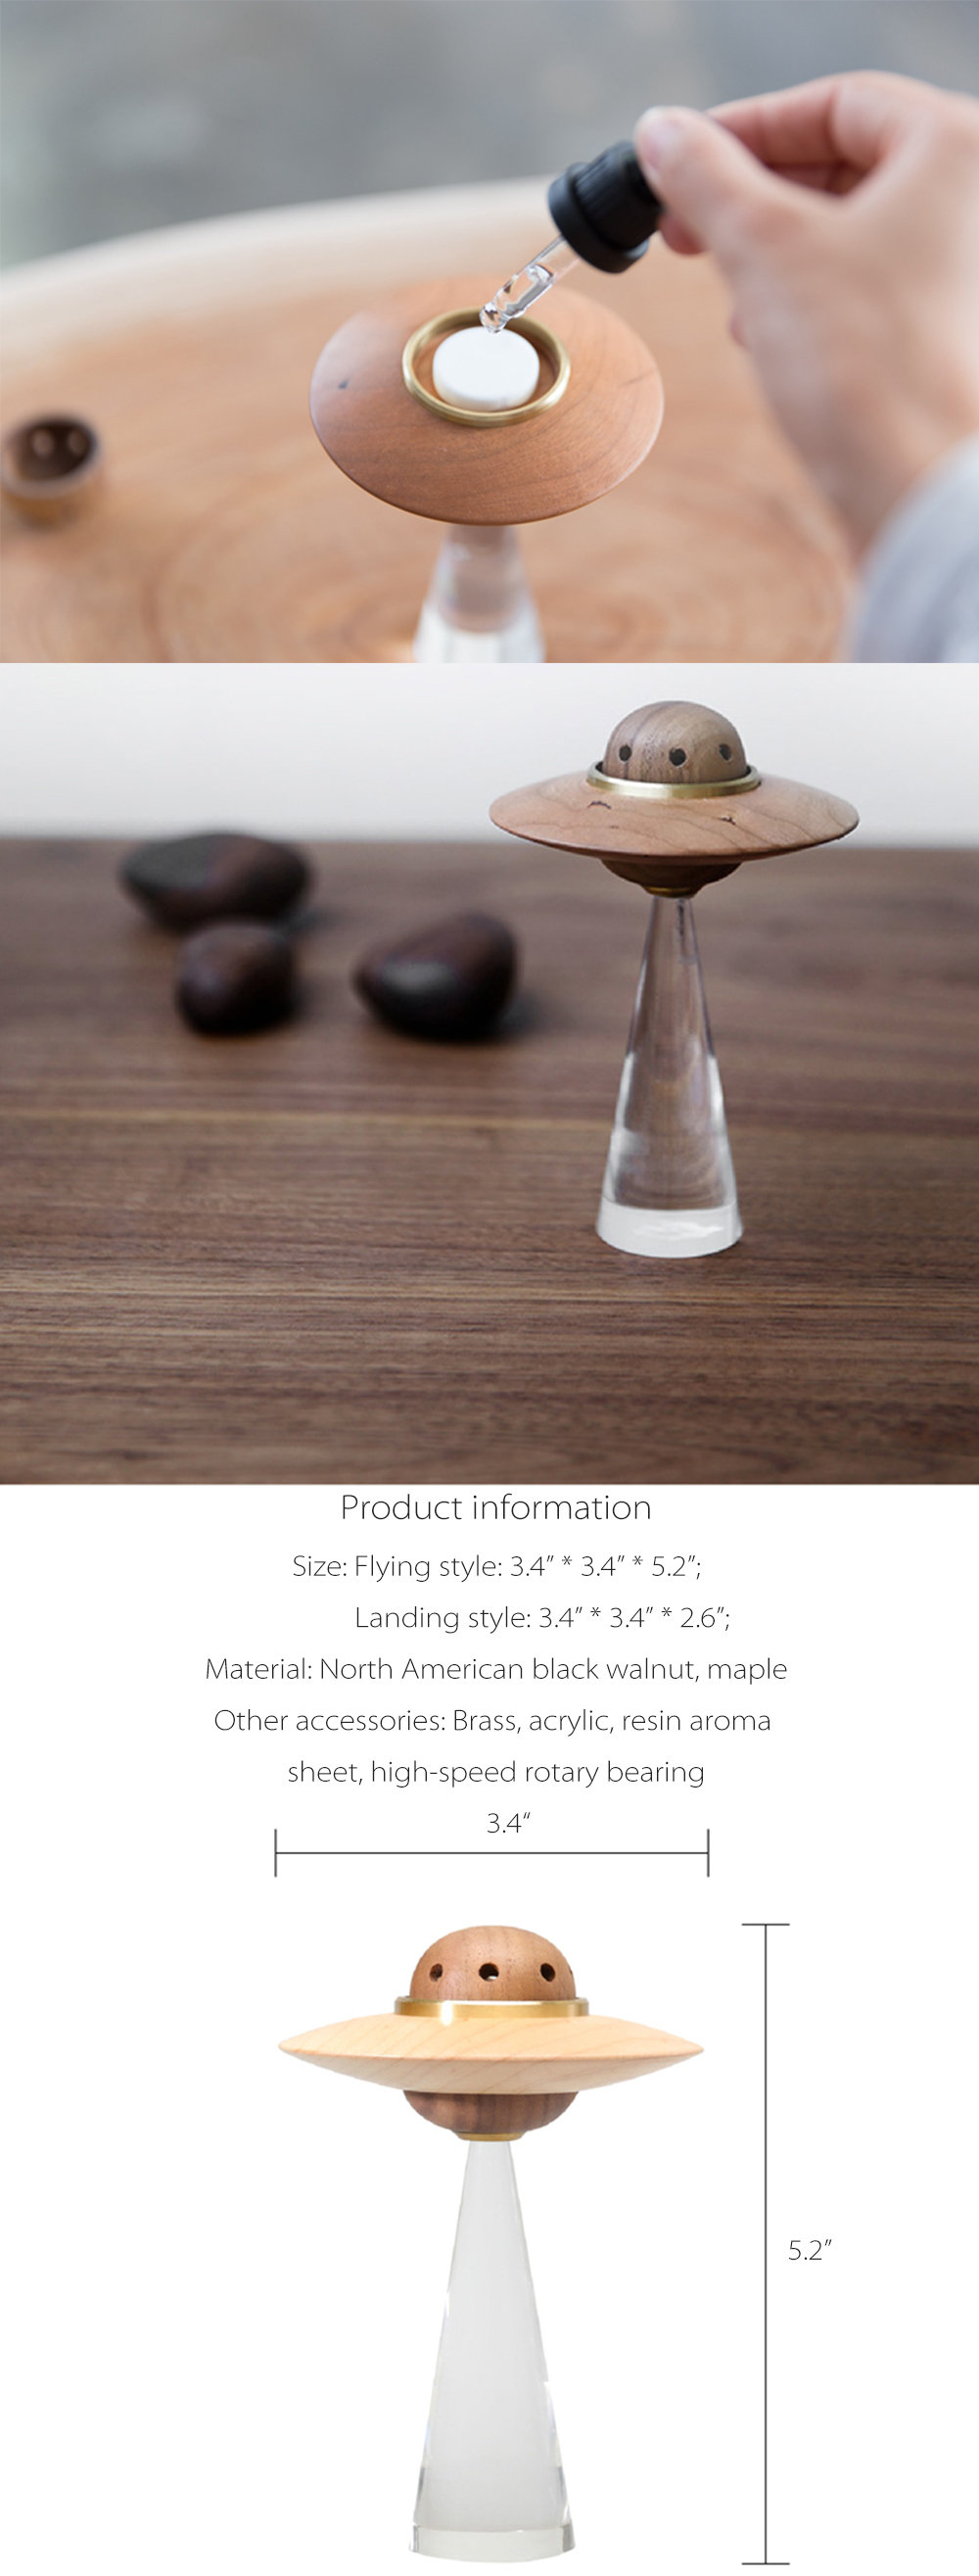 Creative ornaments gifts UFO fragrance diffuser Exploration Series Cosmic Flying Saucer Essential oil aromatherapy black walnut diffuser